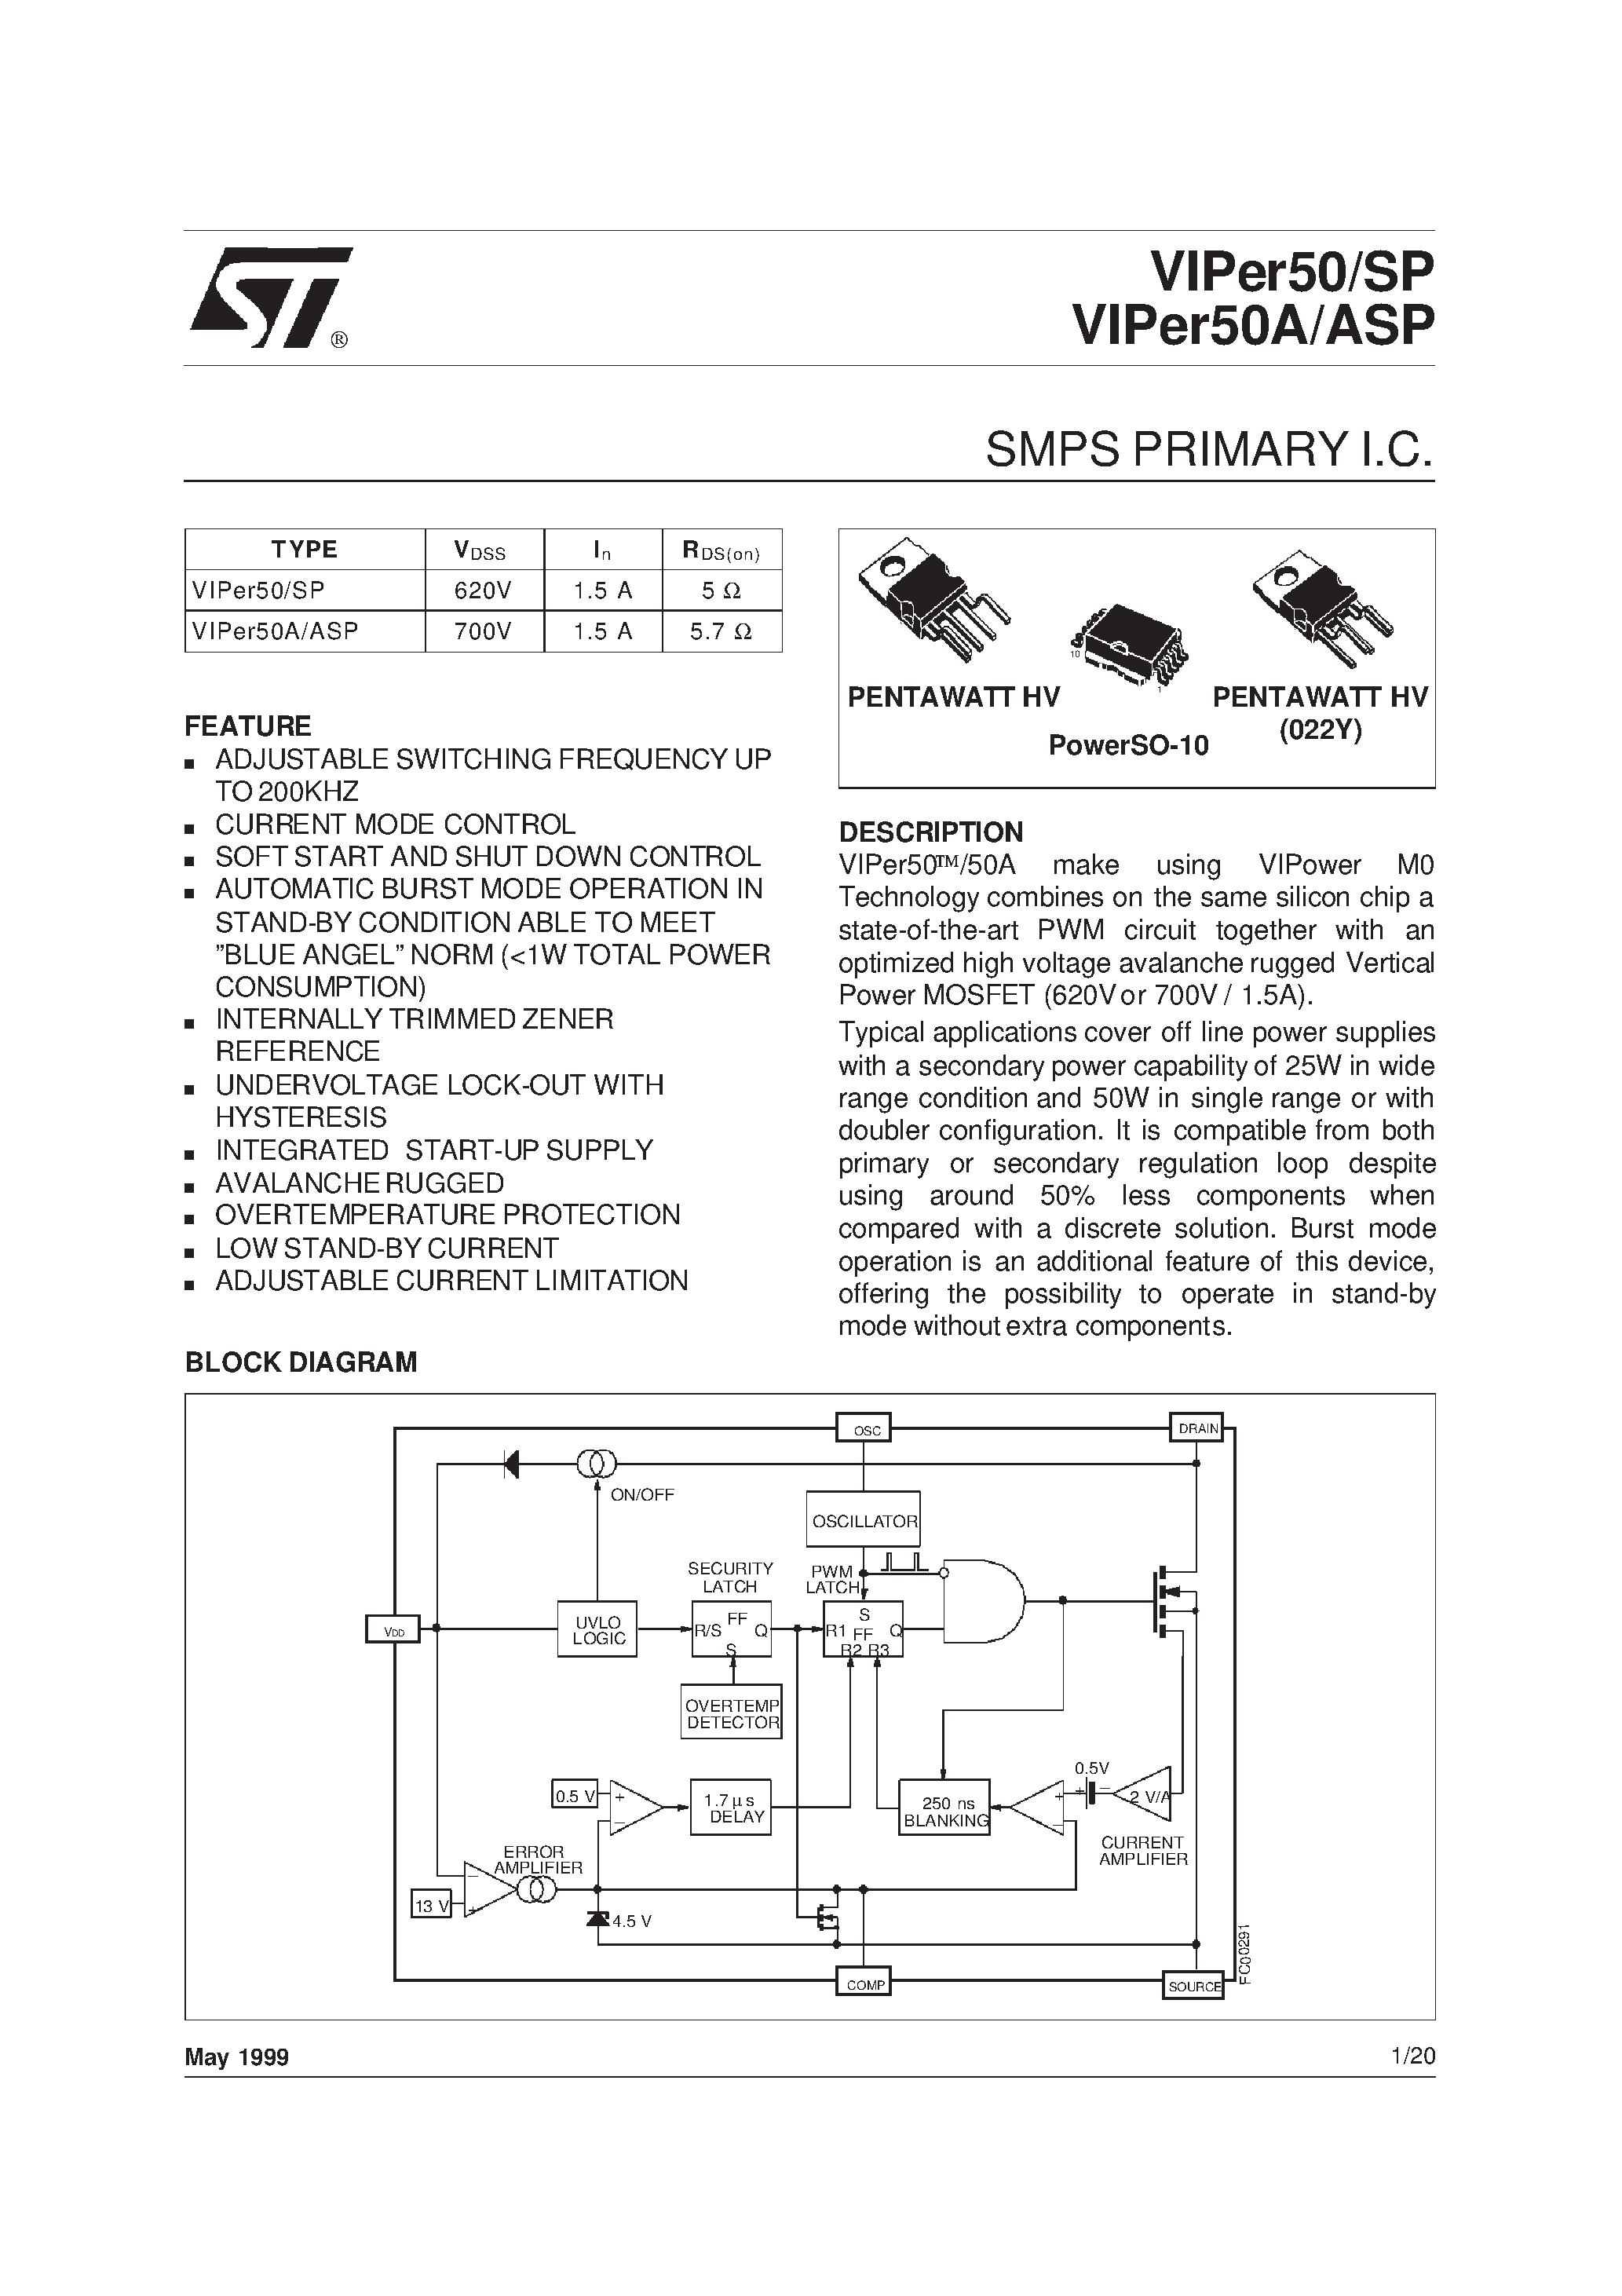 Datasheet VIPer50A - SMPS PRIMARY I.C. page 1